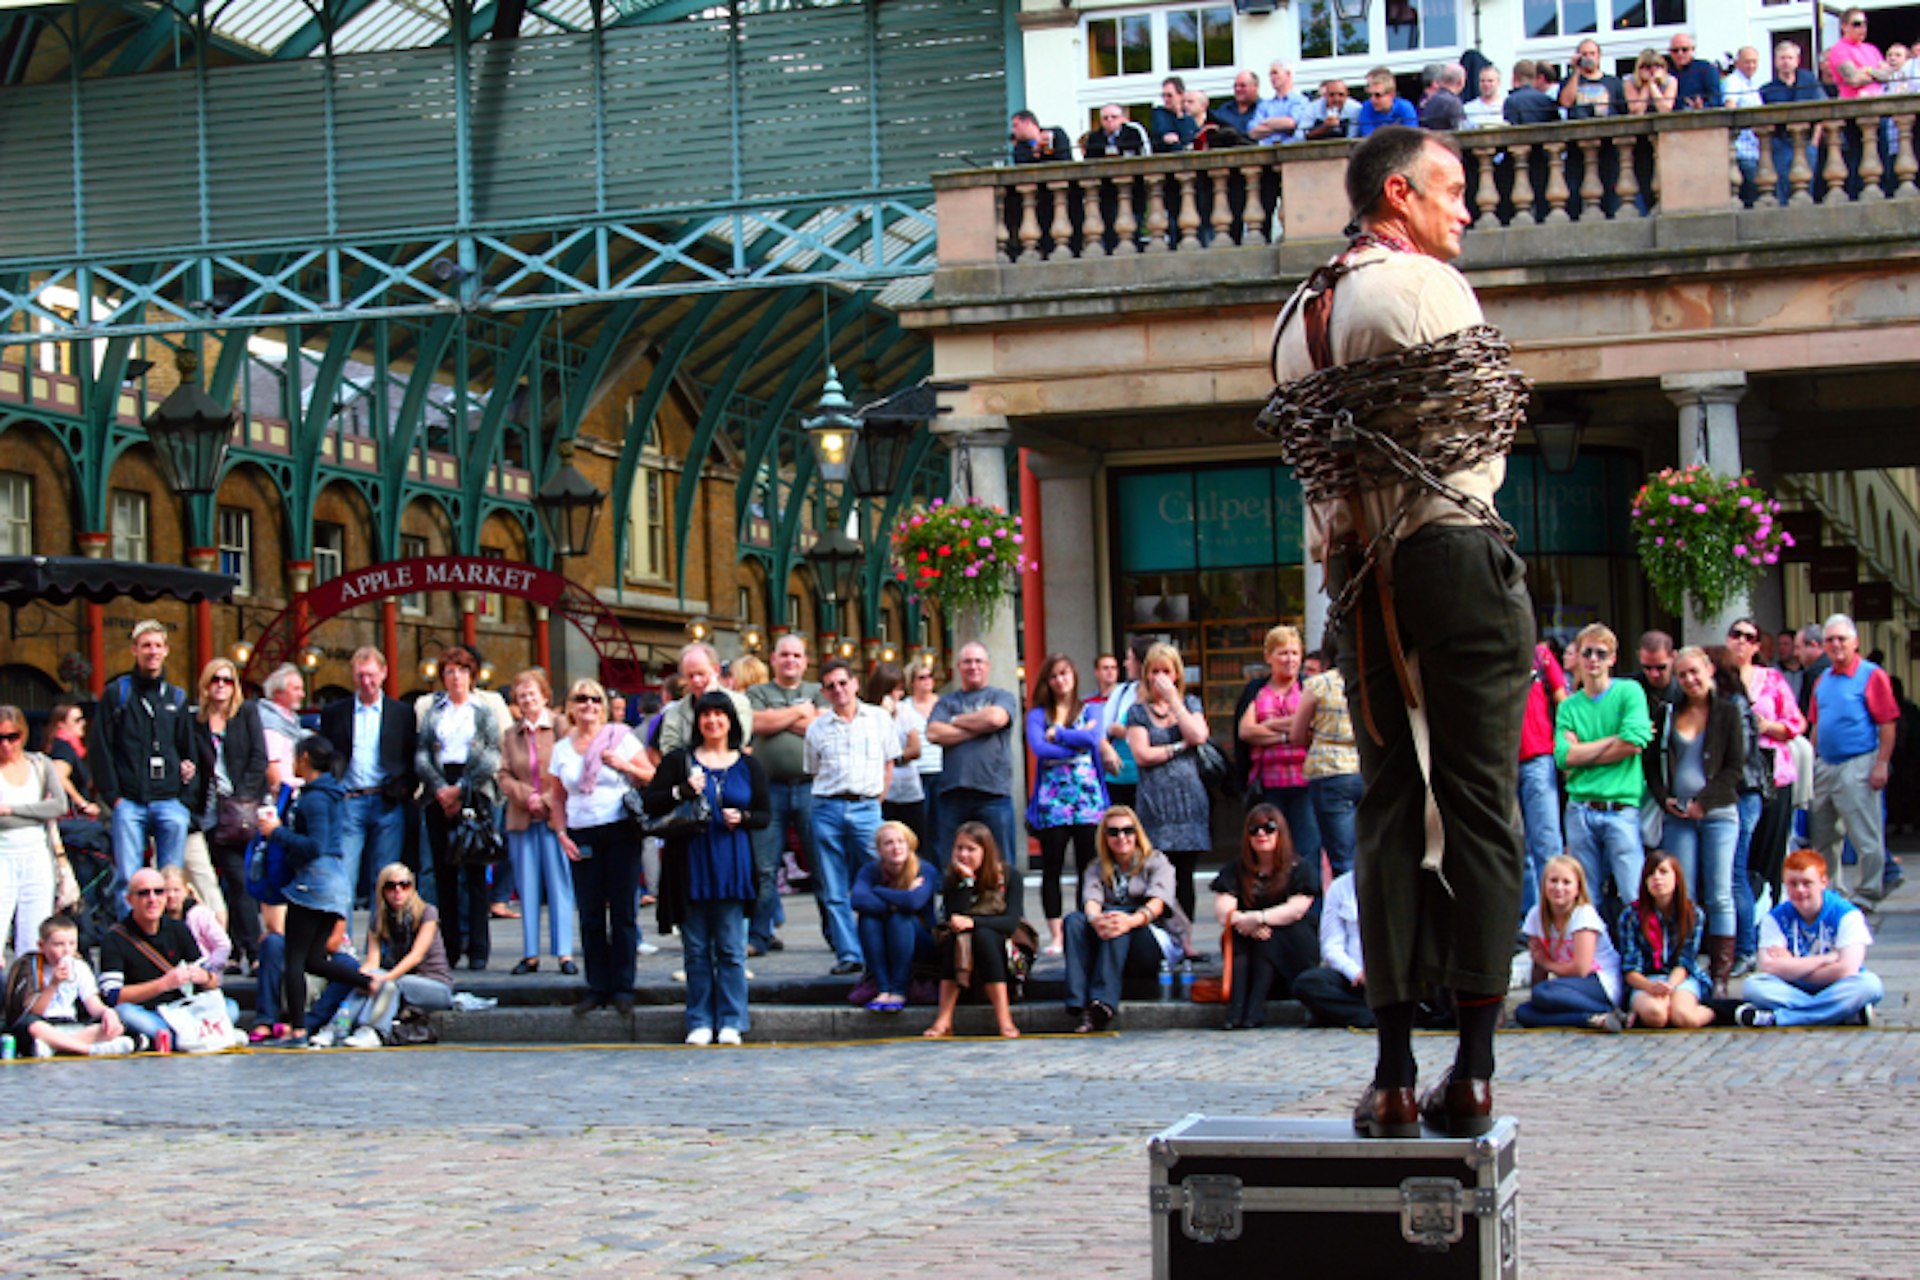 A street performer in Covent Garden. Image by  Anthony Kelly / CC BY 2.0